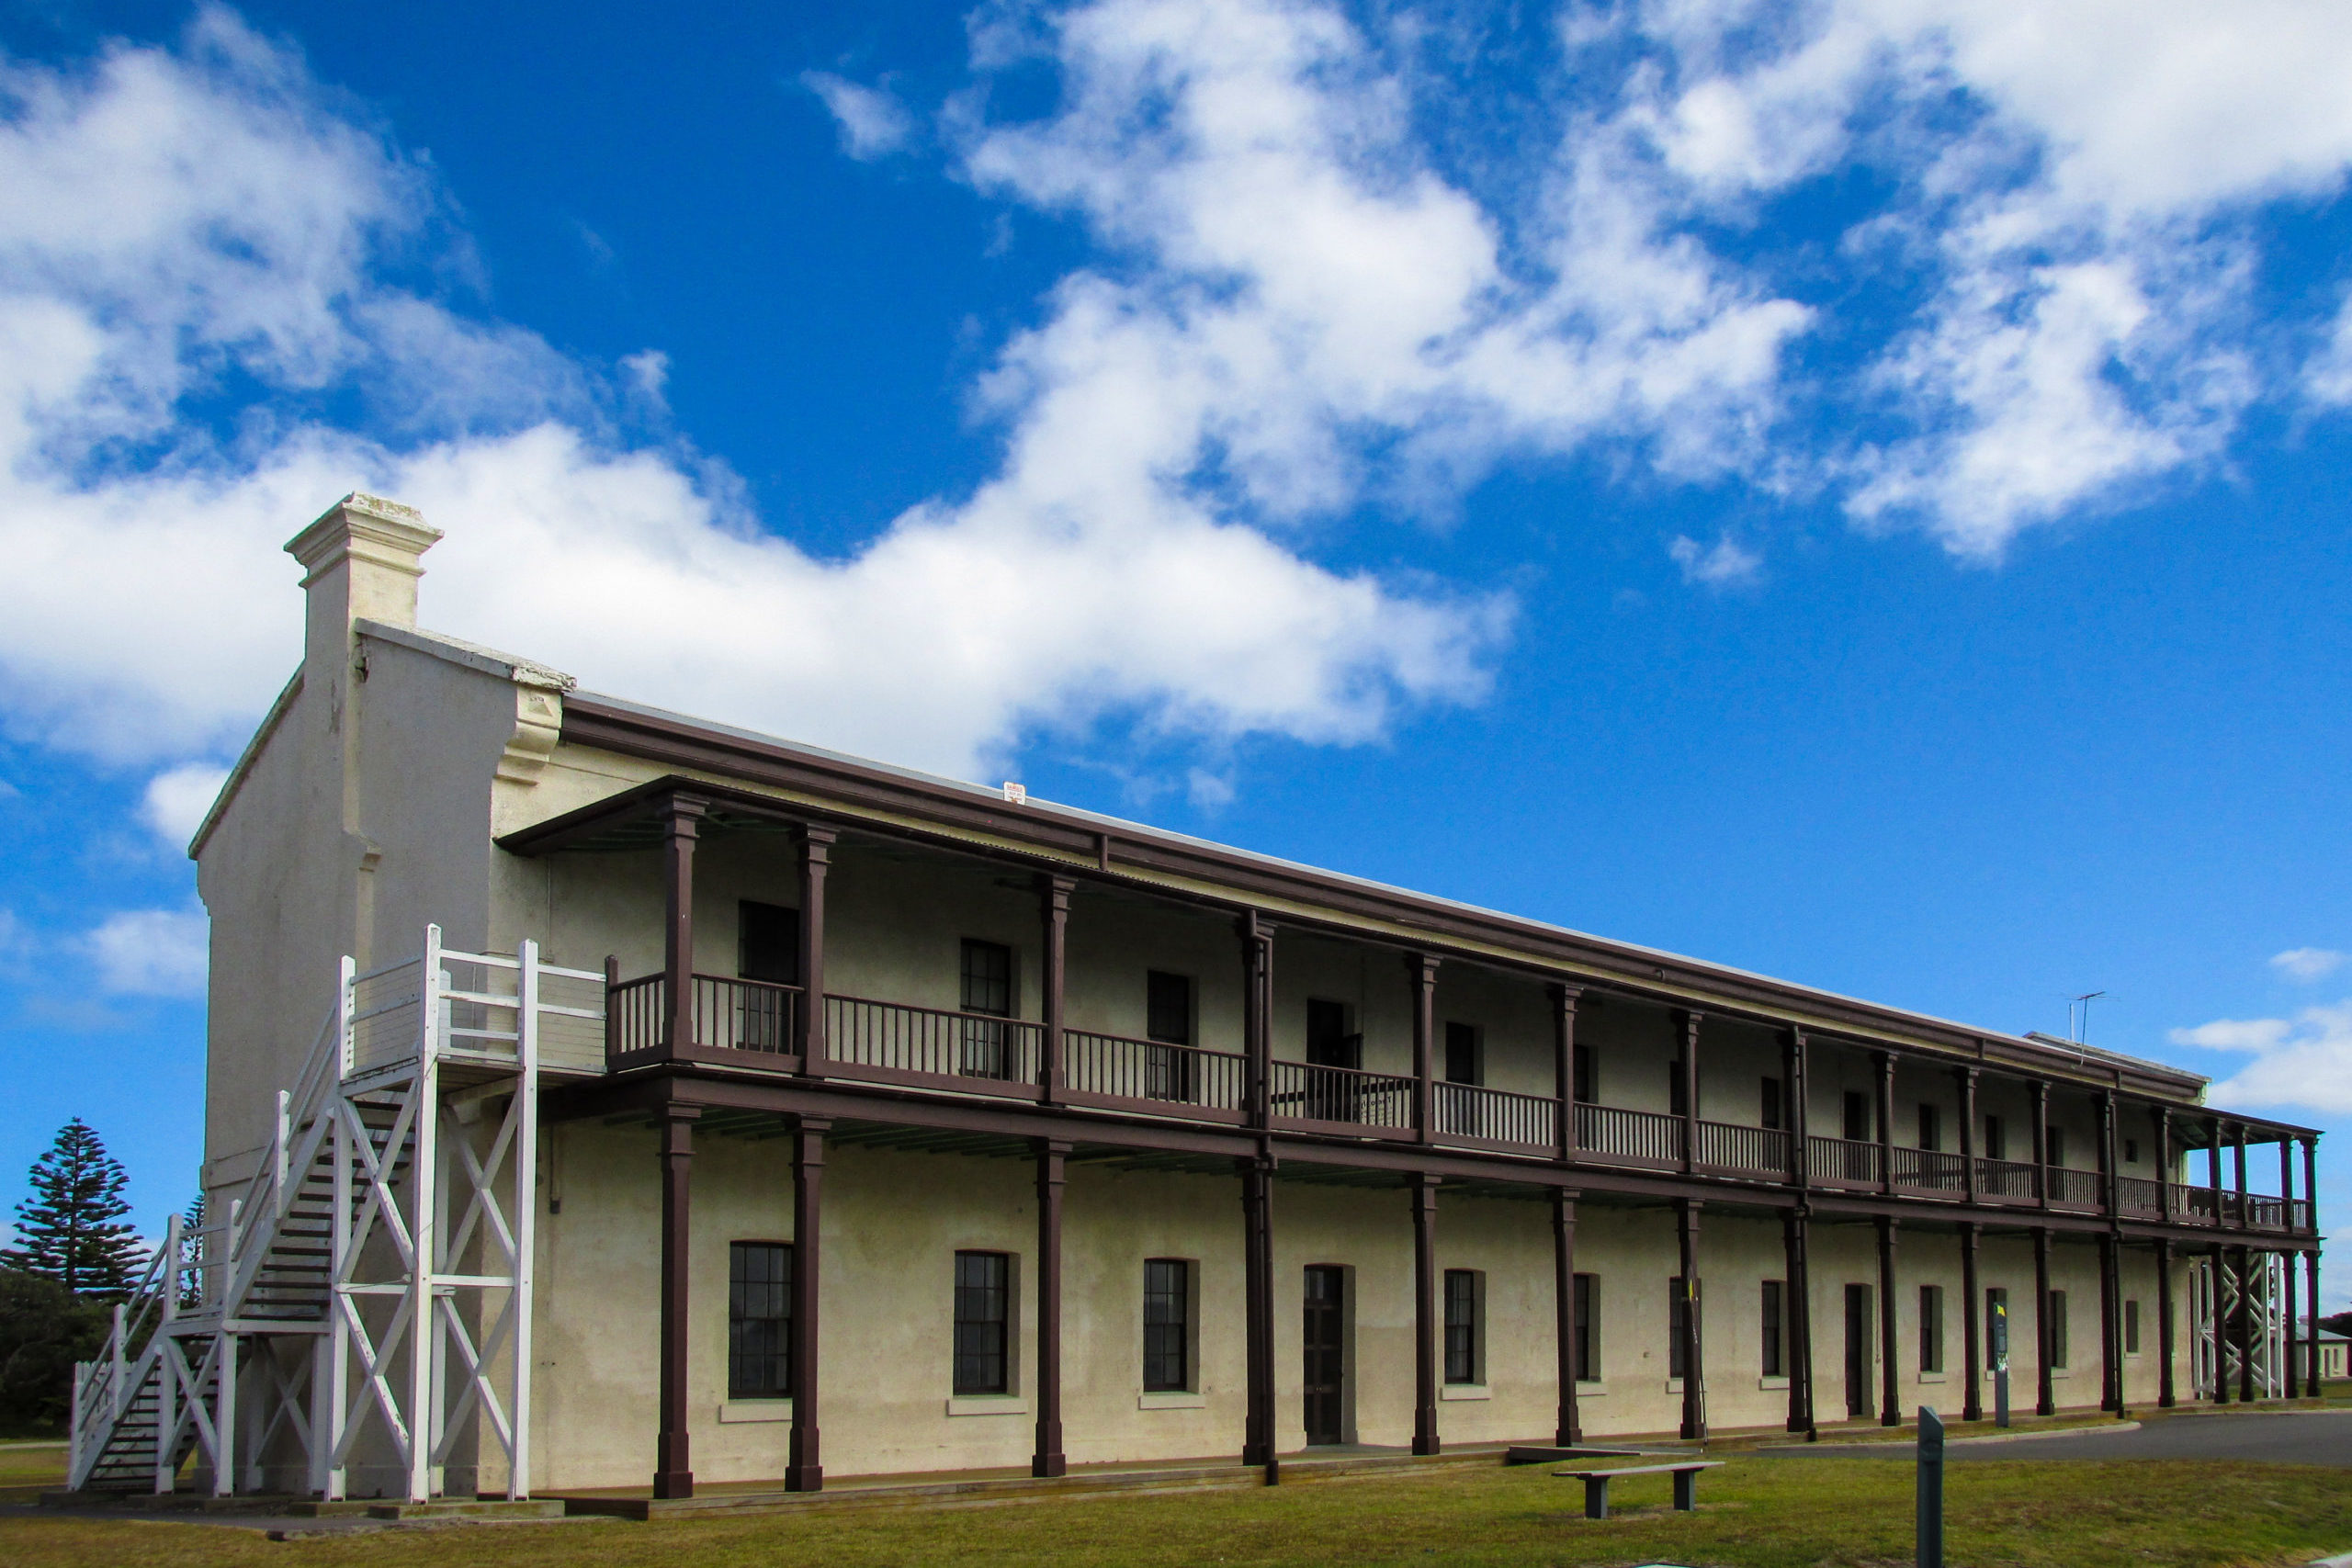 Quarantine Station building complex at Point Nepean National Park